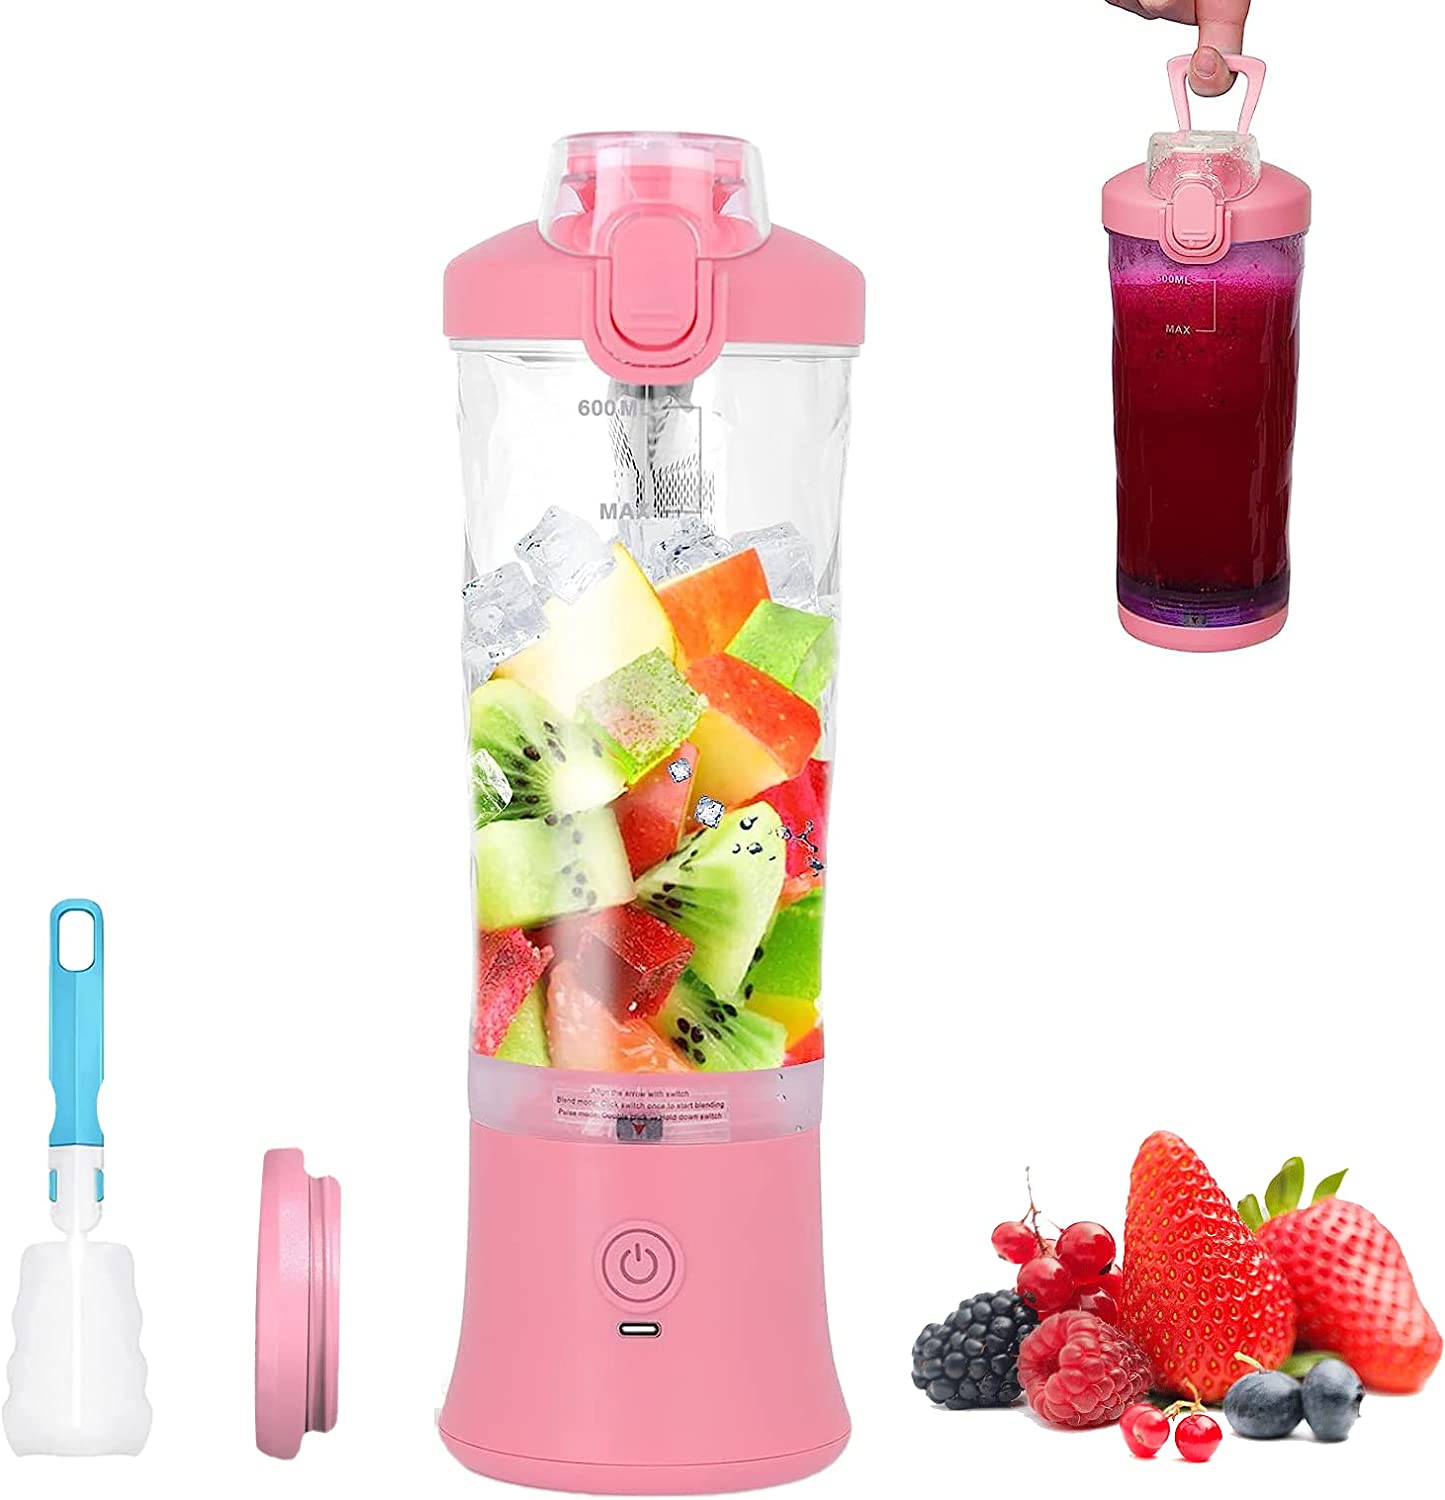 KMVizi Mixer Smoothie Maker, 600 ml Blende Bottle for Smoothies and Shakes, Smoothie Maker to Go With Compulsory Usb-C and 6 Blades, Fresh Juice Mixer Bottle for Travel, Kitchen, Office (Pink)